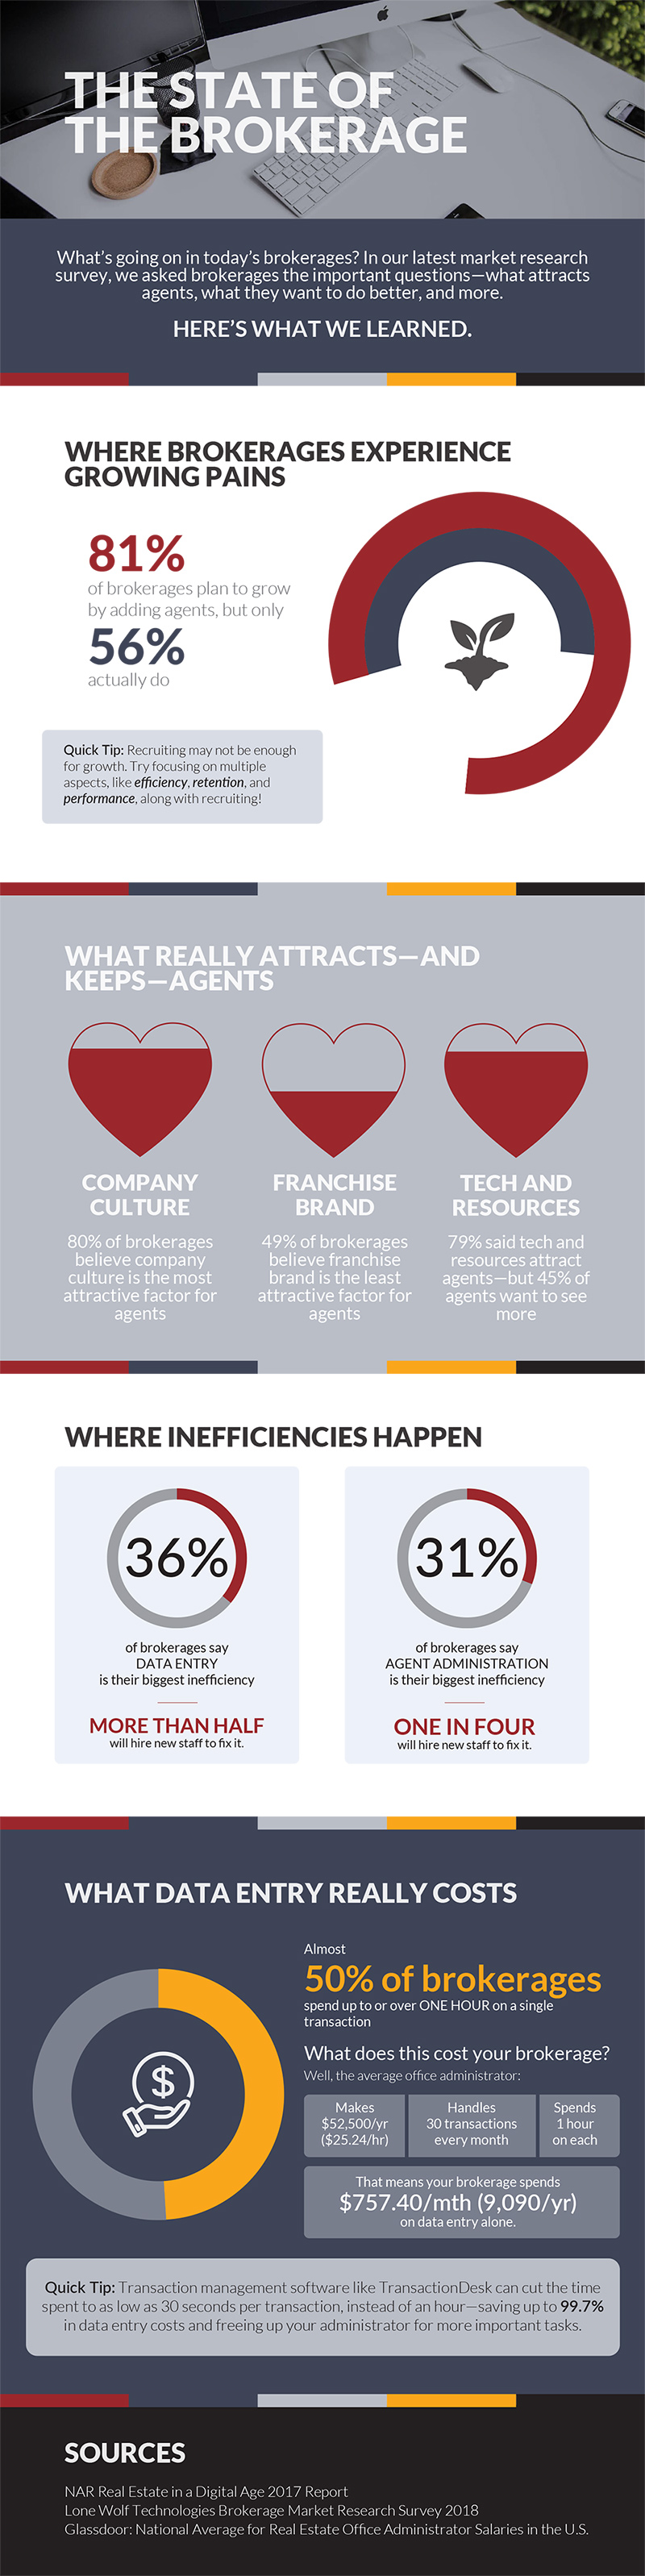 The State of the Brokerage - Infographic